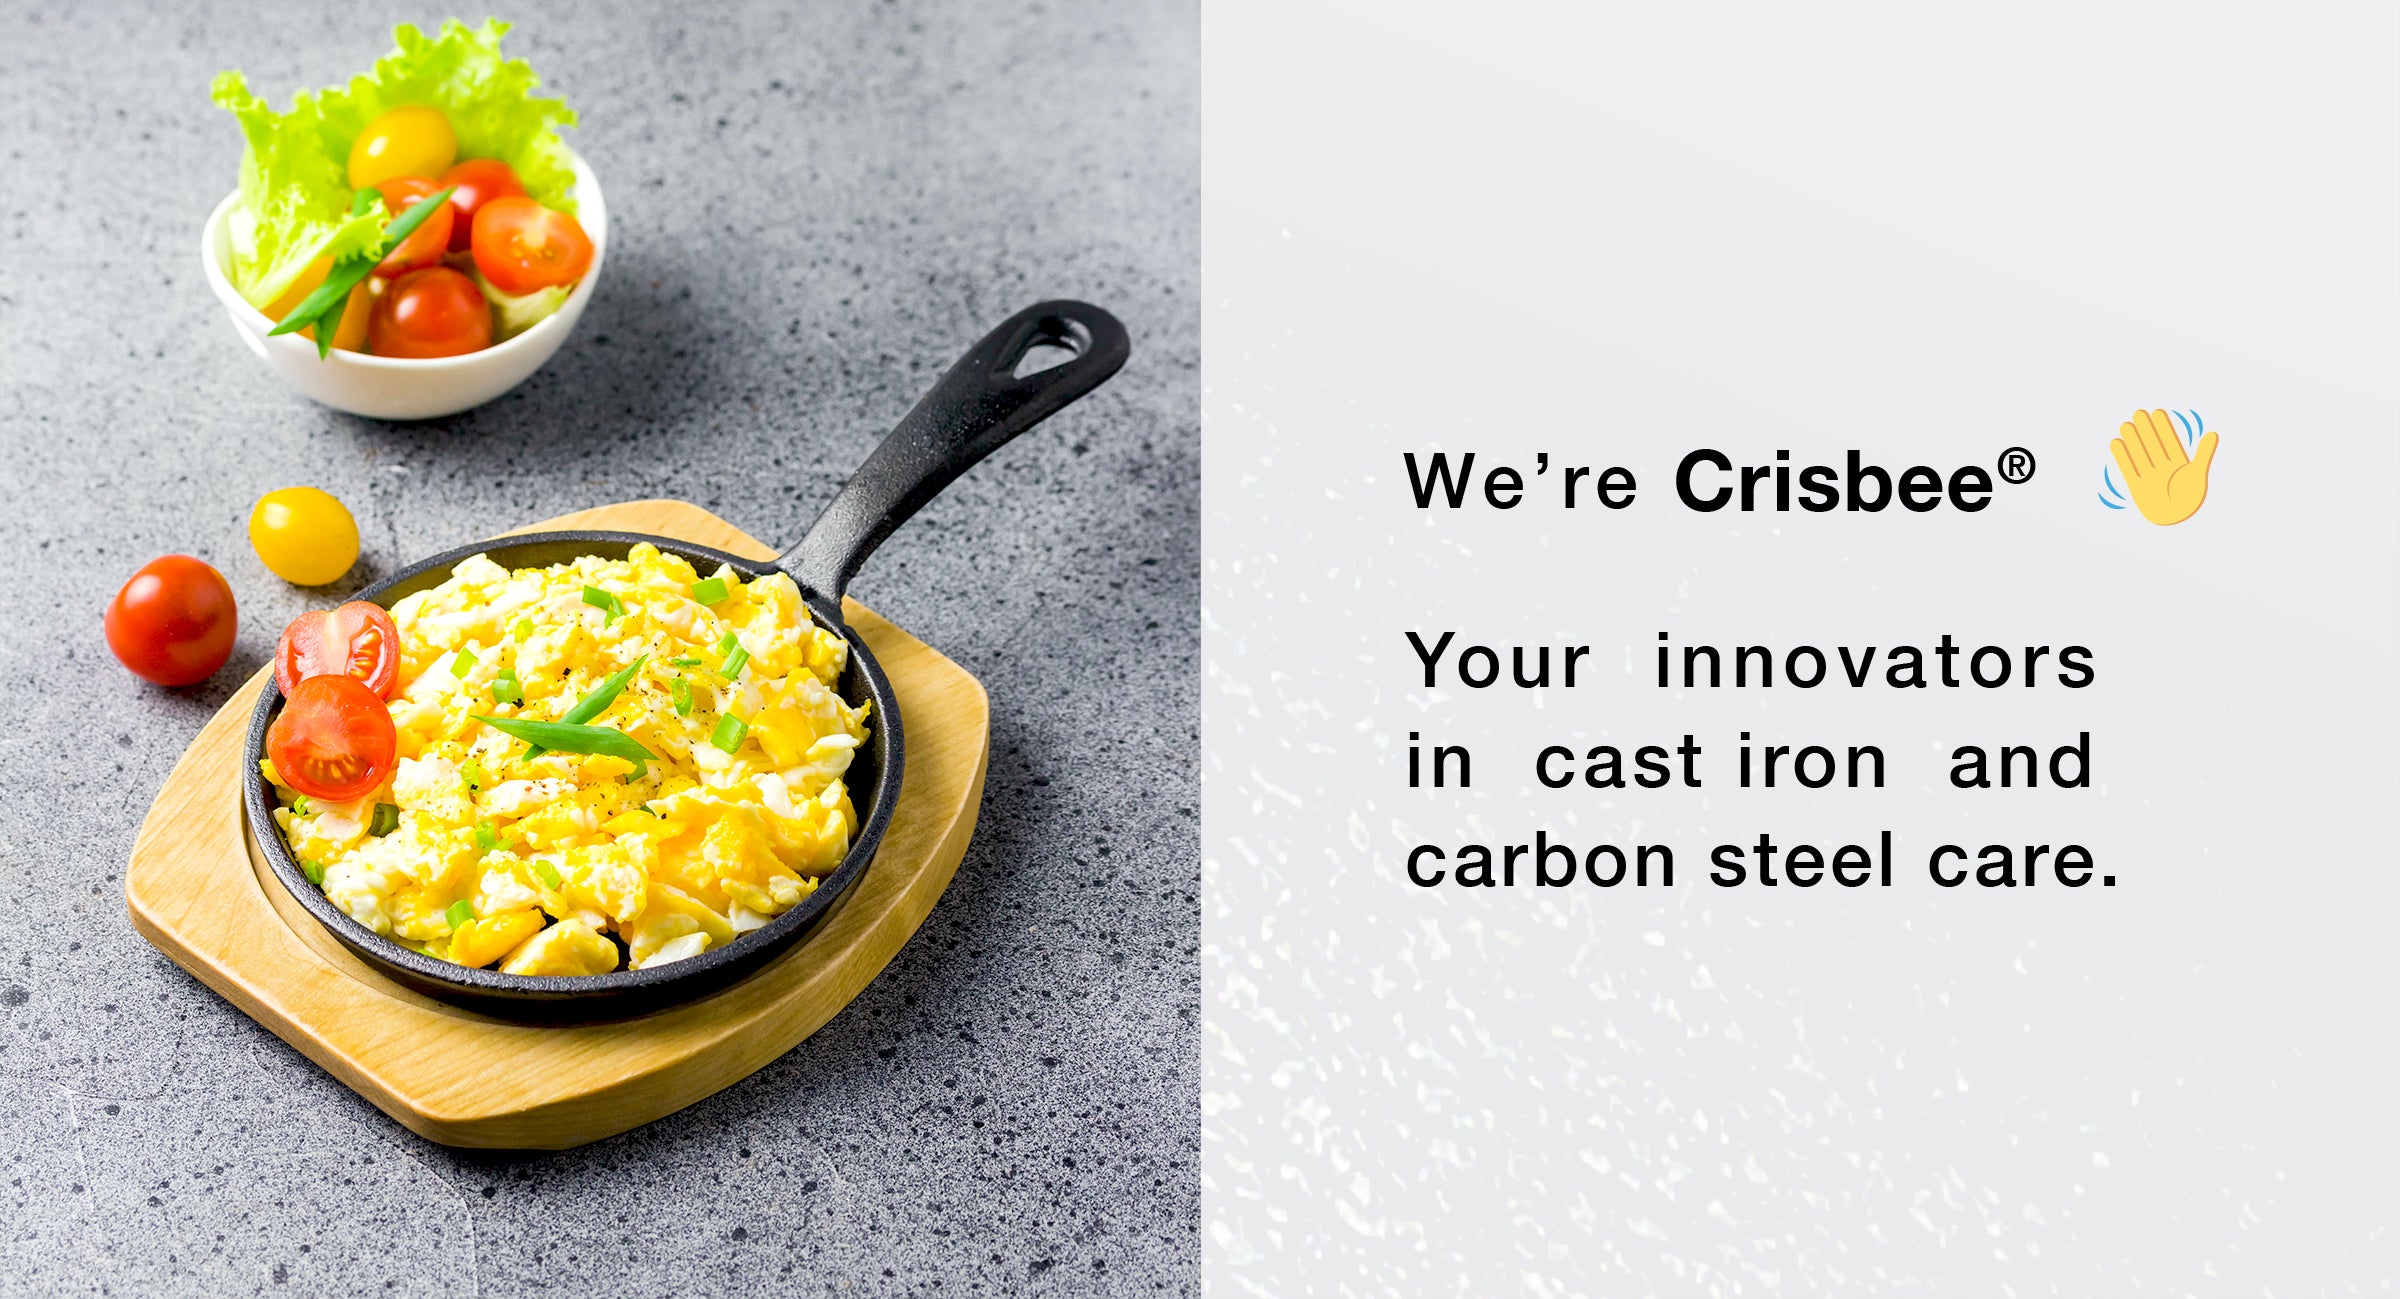 Cast iron skillet with eggs "We're Crisbee, your innovators in cast iron and carbon steel seasoning and care"